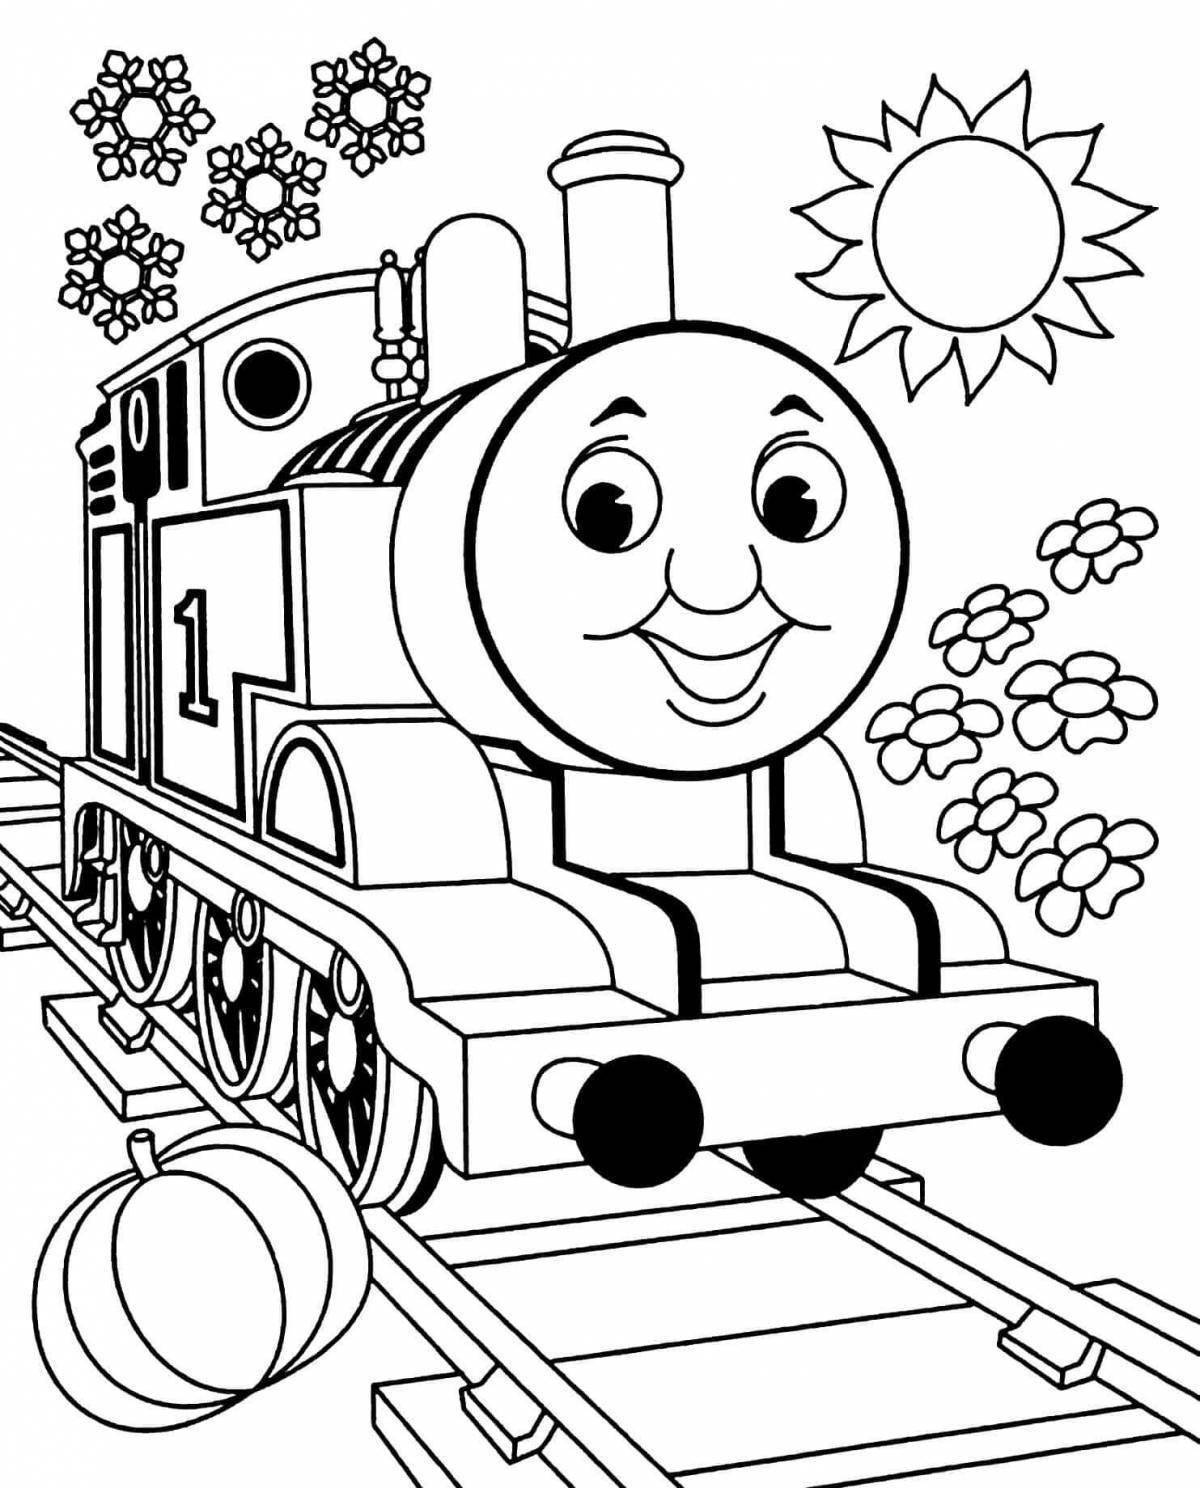 Great train coloring book for kids